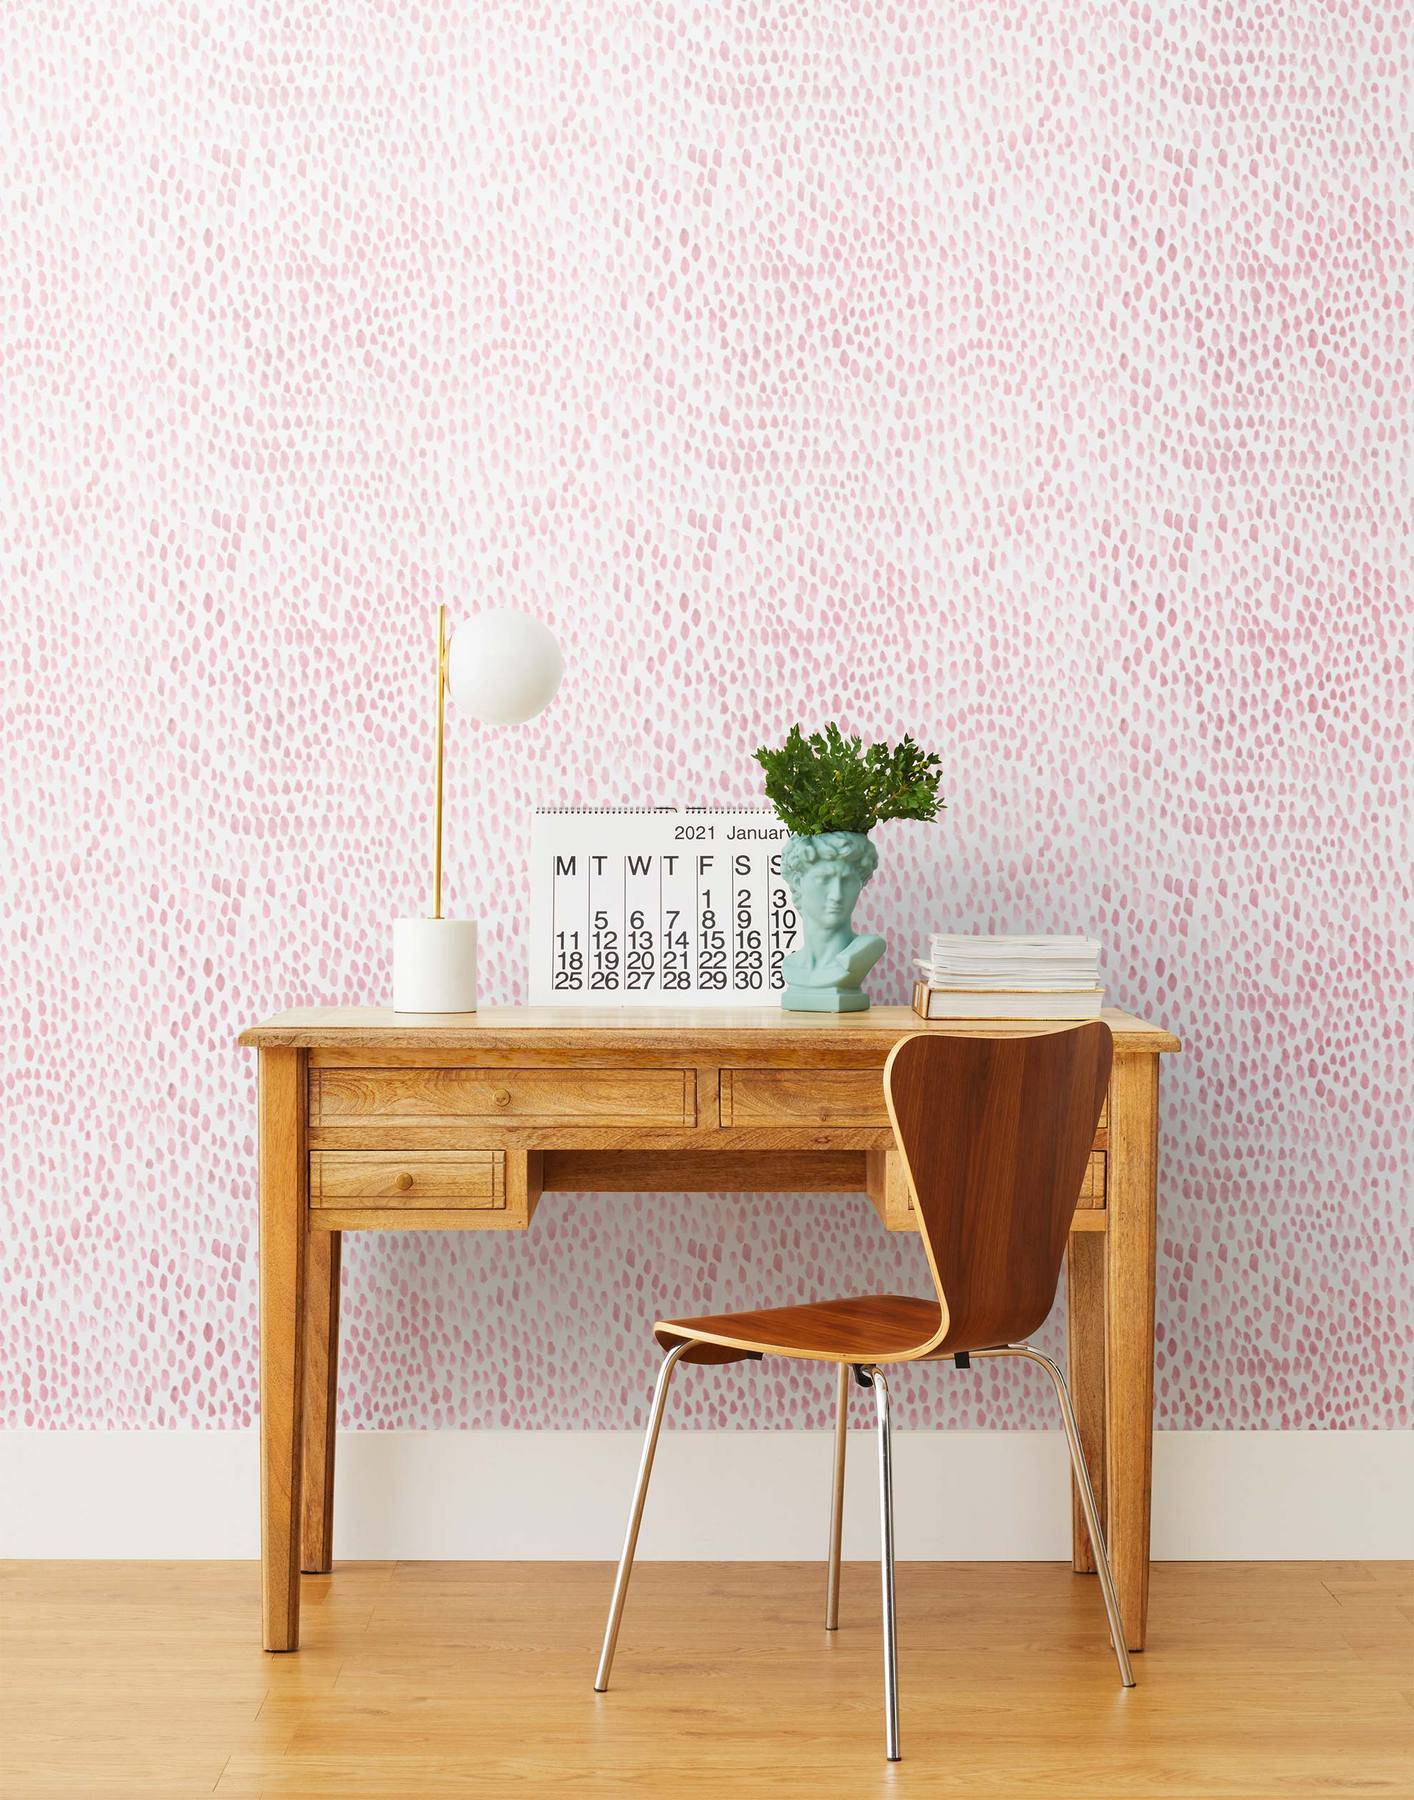 Raindrops Wallpaper from Hygge and West